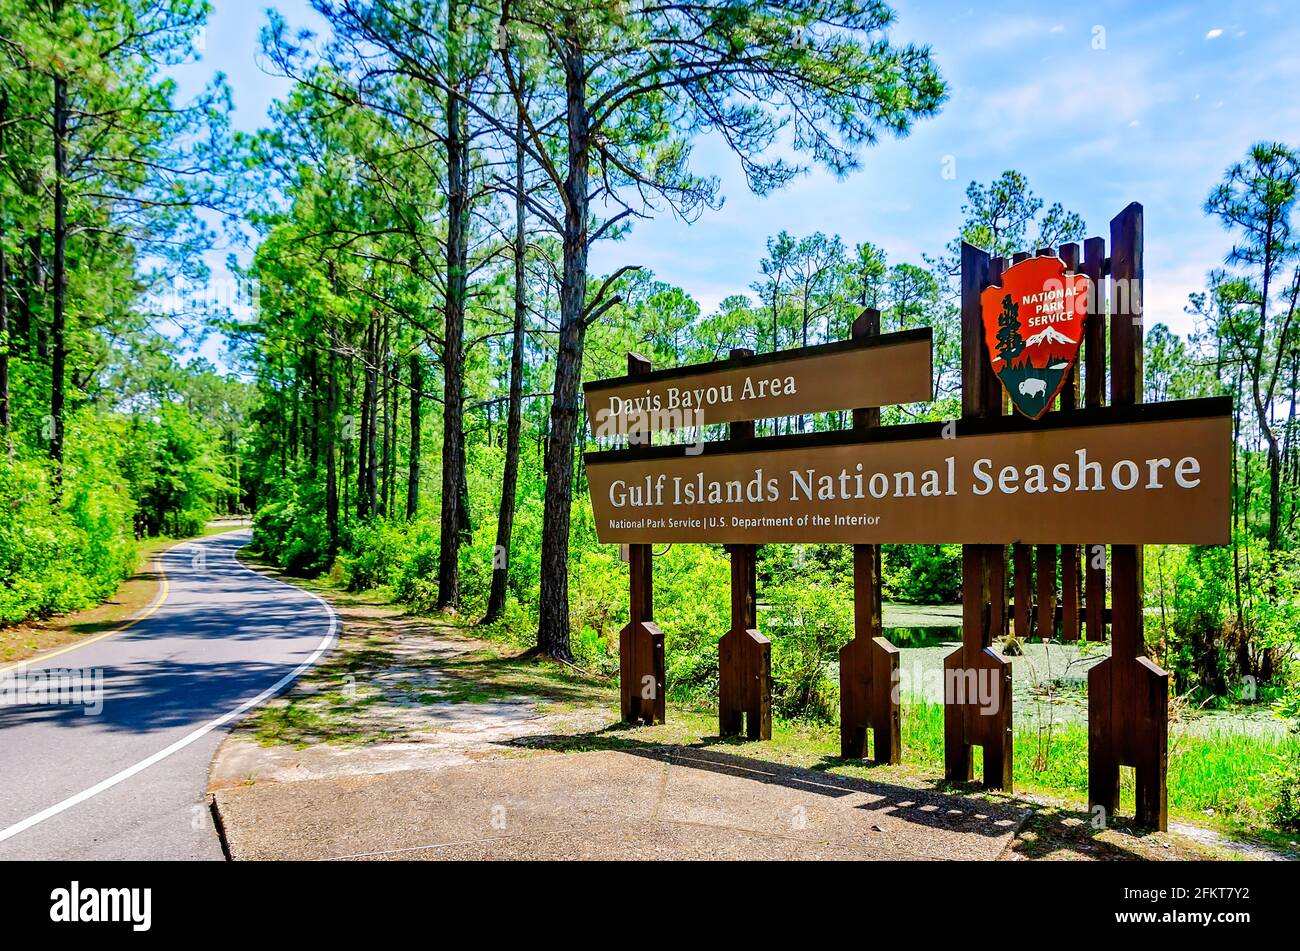 A sign stands at the entrance to the Davis Bayou Area of Gulf Islands National Seashore, May 1, 2021, in Ocean Springs, Mississippi. Stock Photo